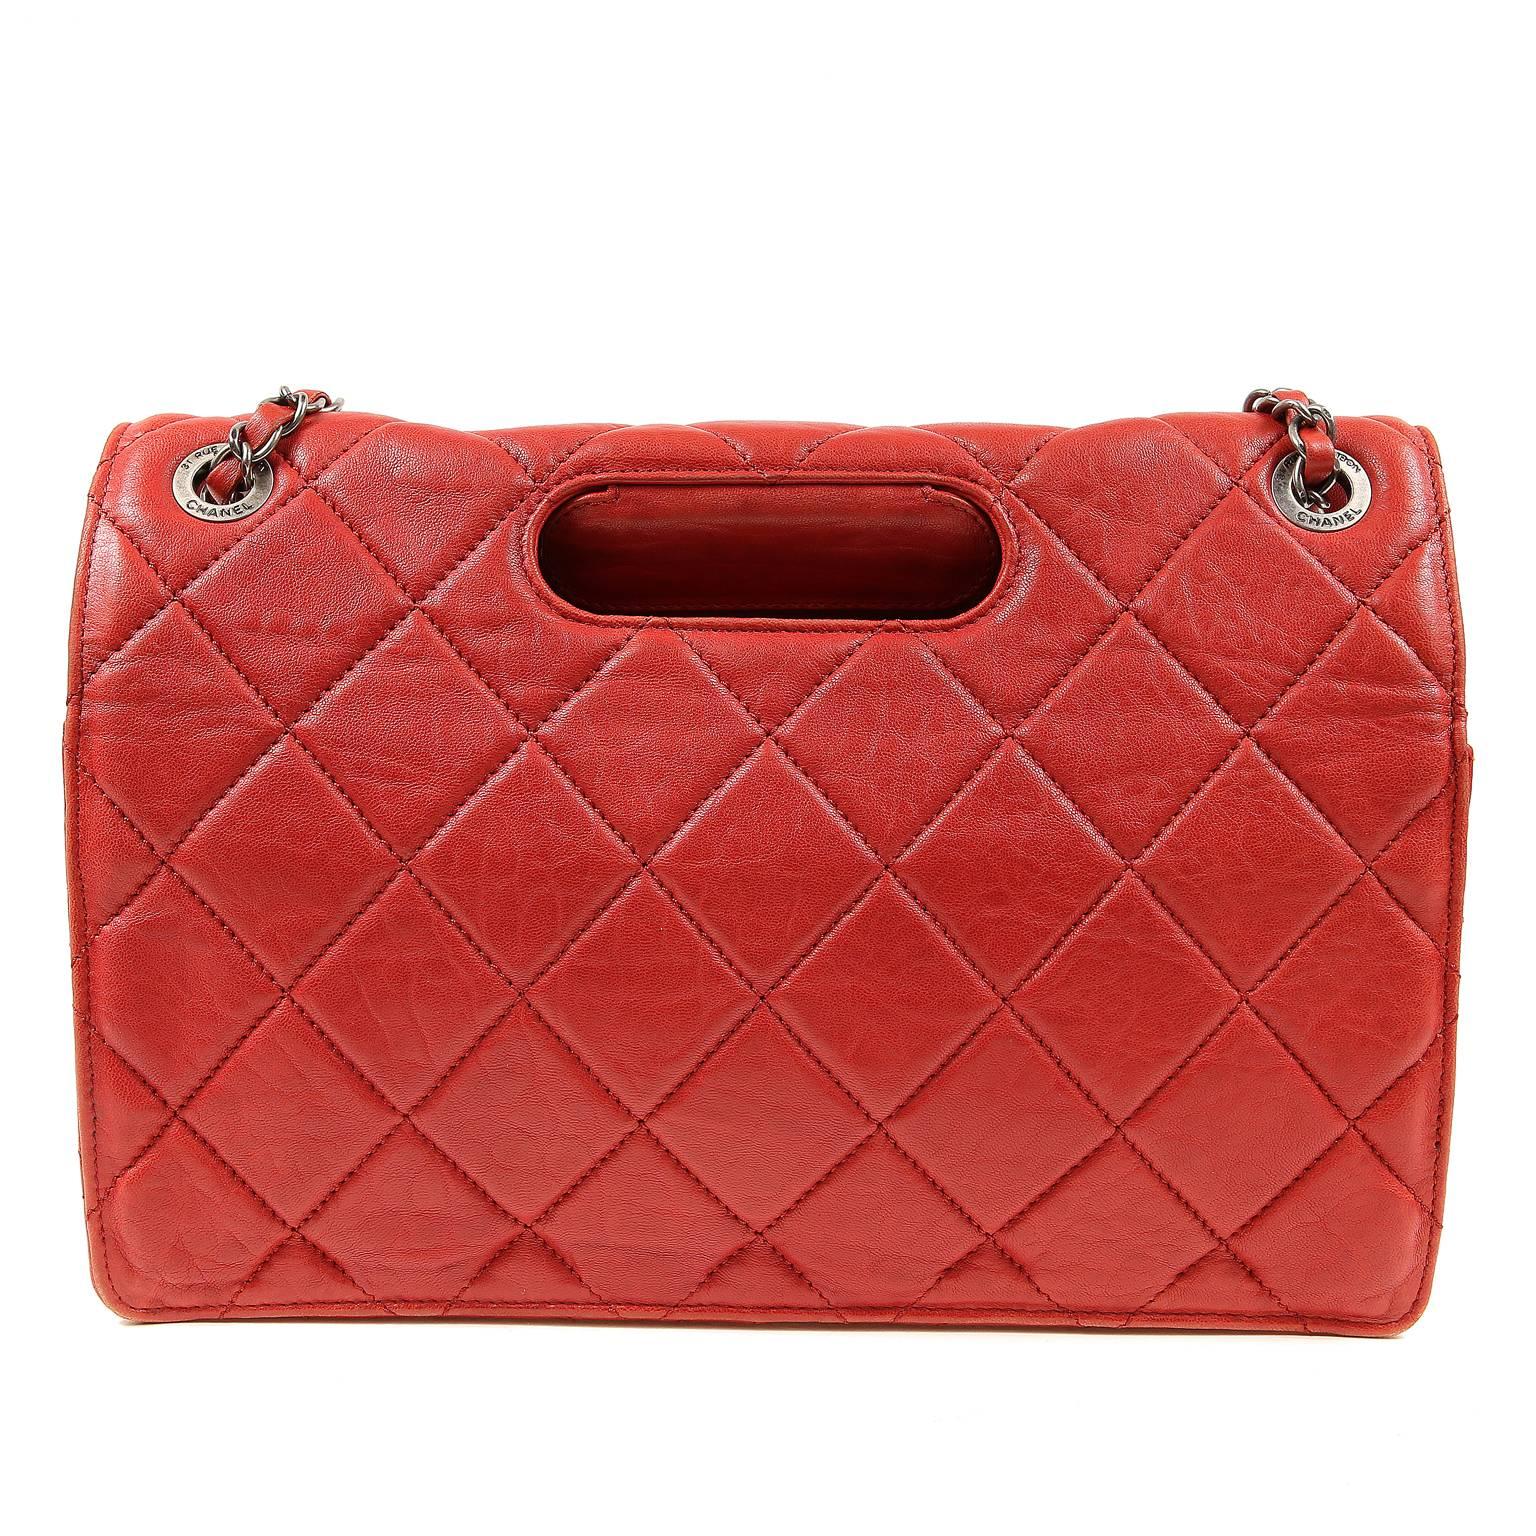 Chanel Red Lambskin Hand Held Flap Bag- PRISTINE
 From the 2011 Paris Byzance collection, it may be carried as a clutch or on the shoulder in the classic style. 

Lipstick red lambskin is quilted in signature Chanel diamond stitched pattern. 